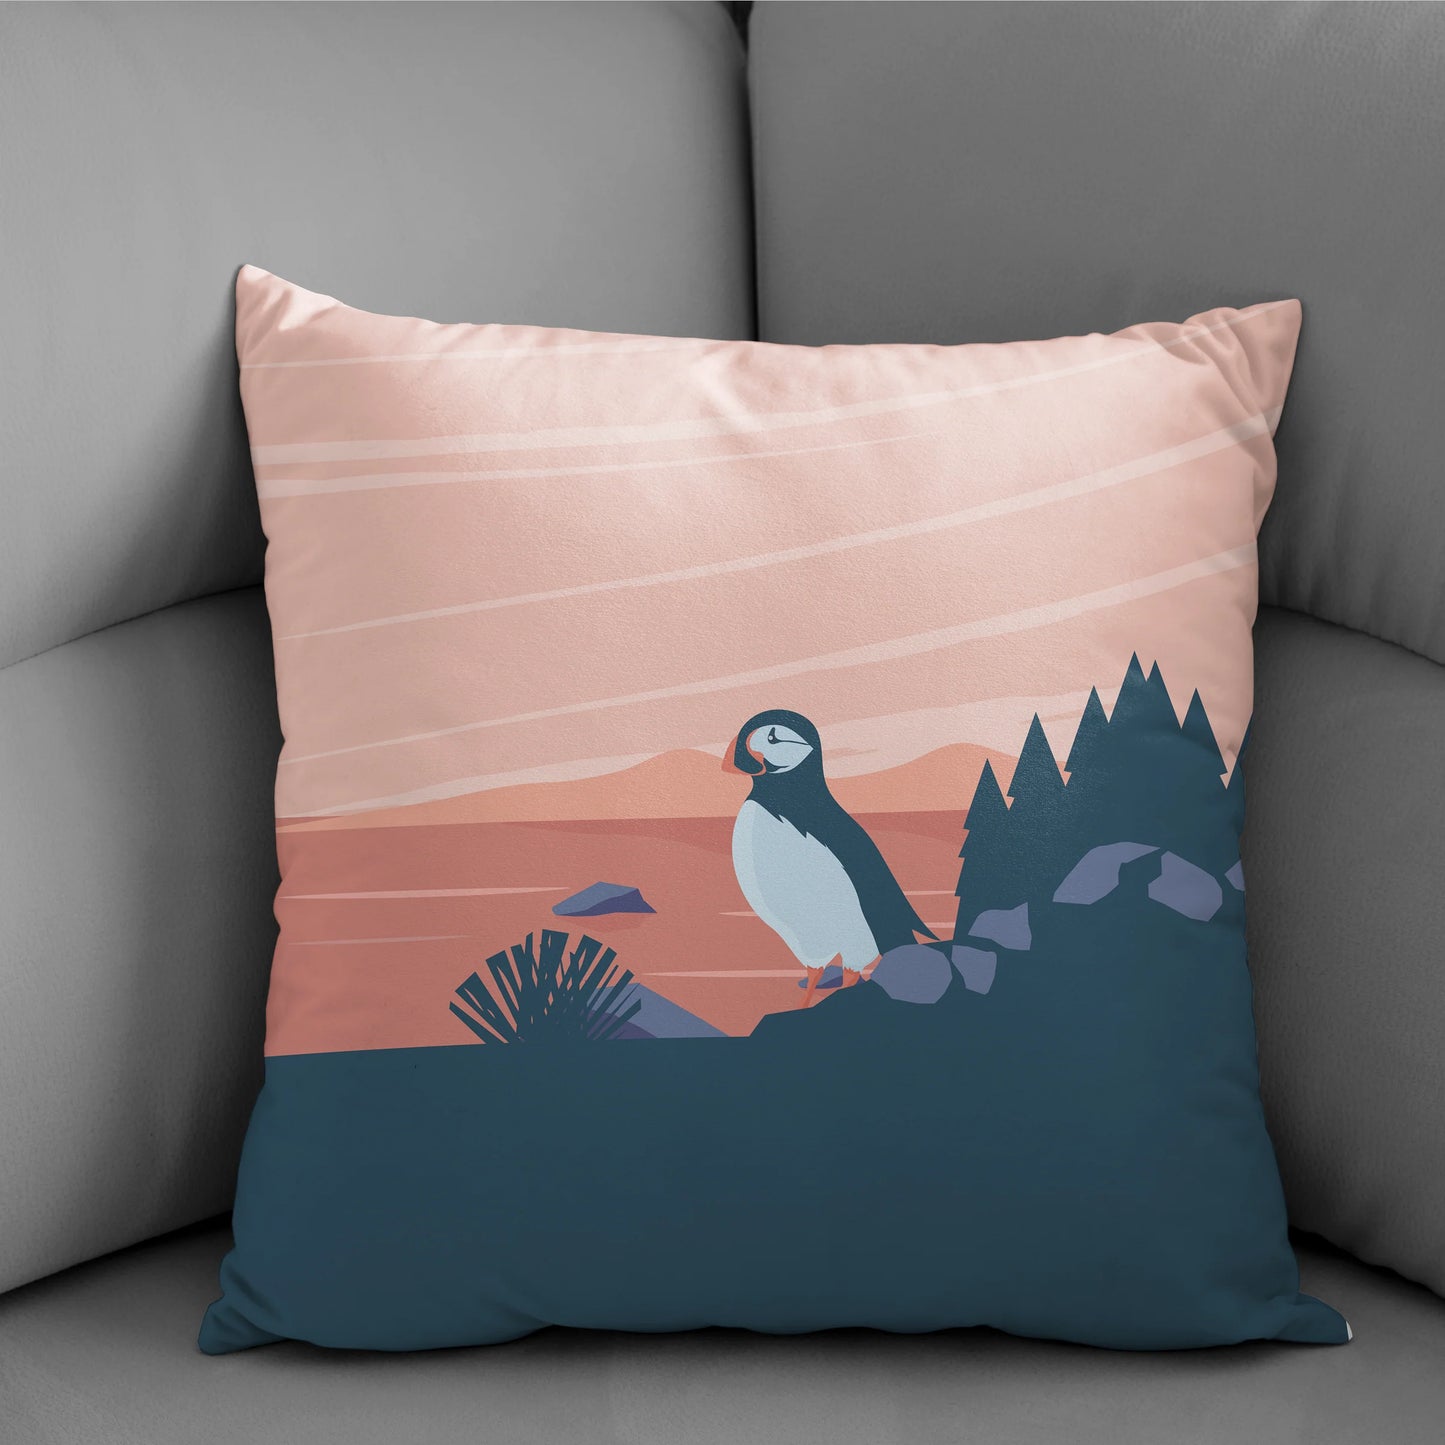 Cushion Cover - Personalised Sample